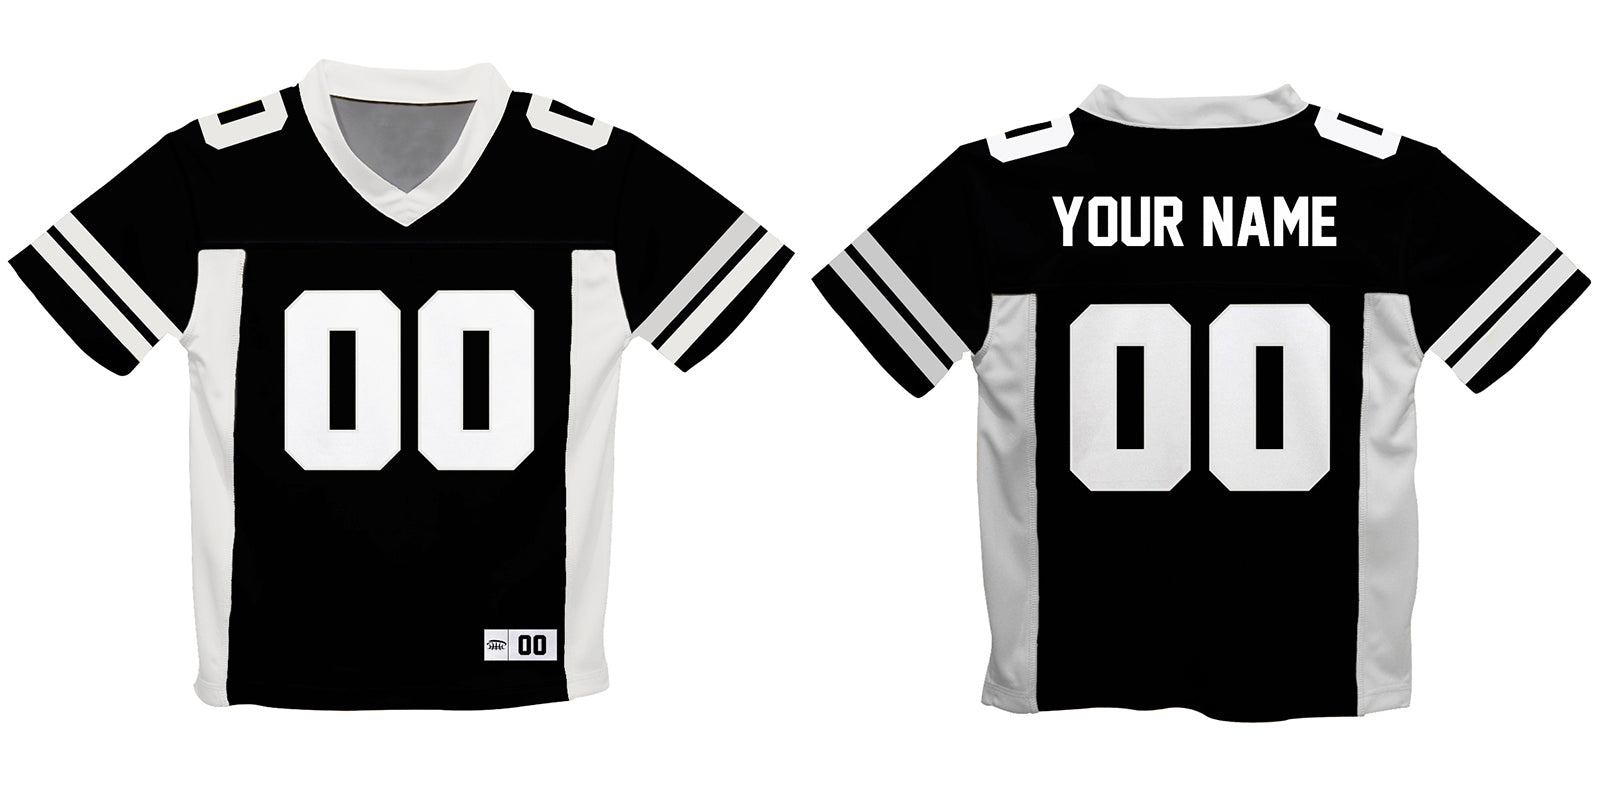 Personalized Name and Number Black and White Fashion Football T-Shirt - Wimziy&Co.